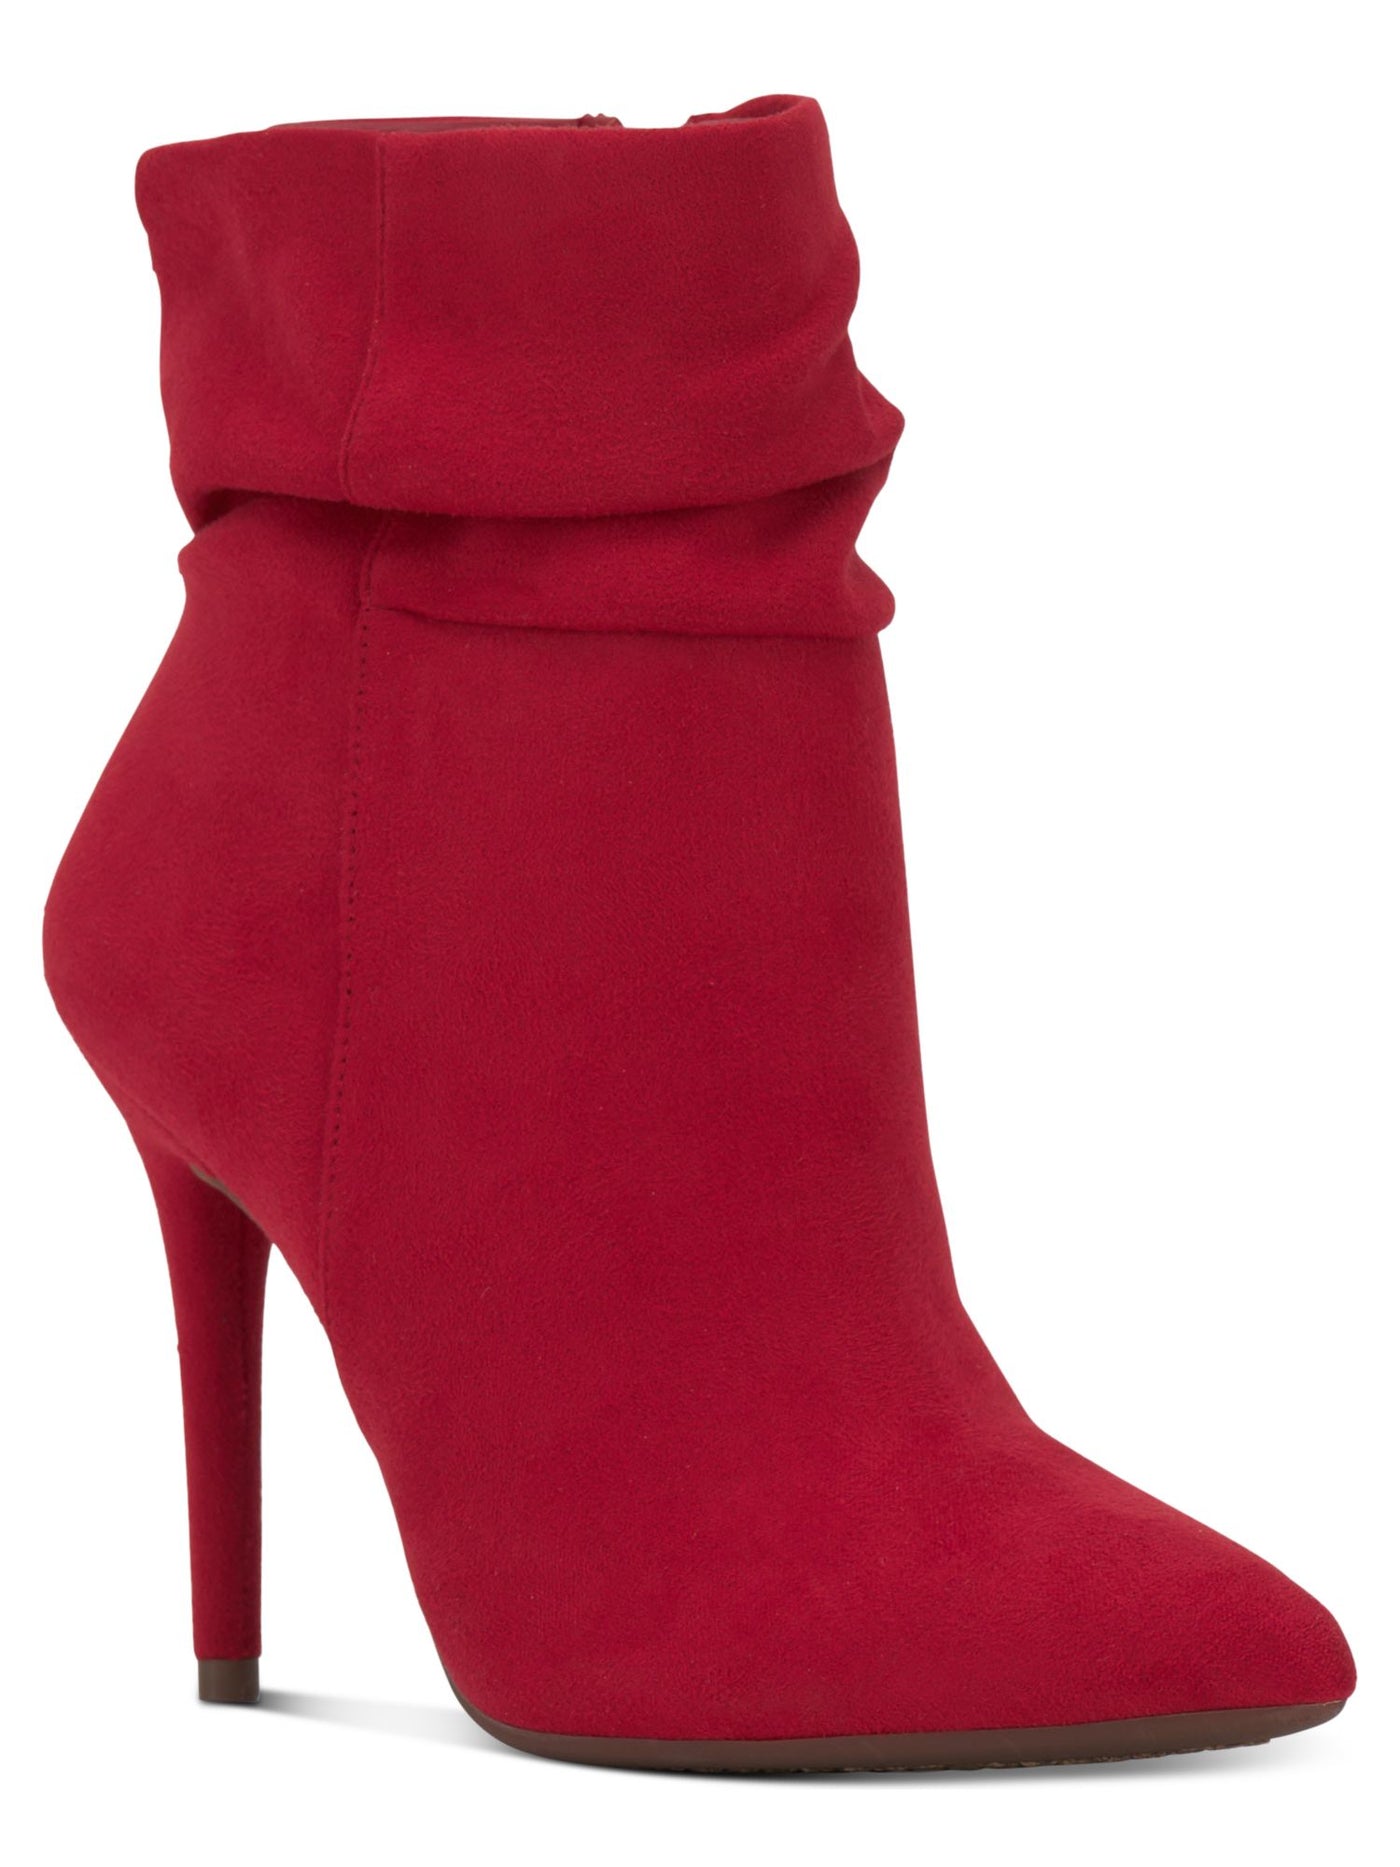 JESSICA SIMPSON Womens Red Cushioned Ruched Lerona Pointed Toe Stiletto Zip-Up Dress Booties 8 M